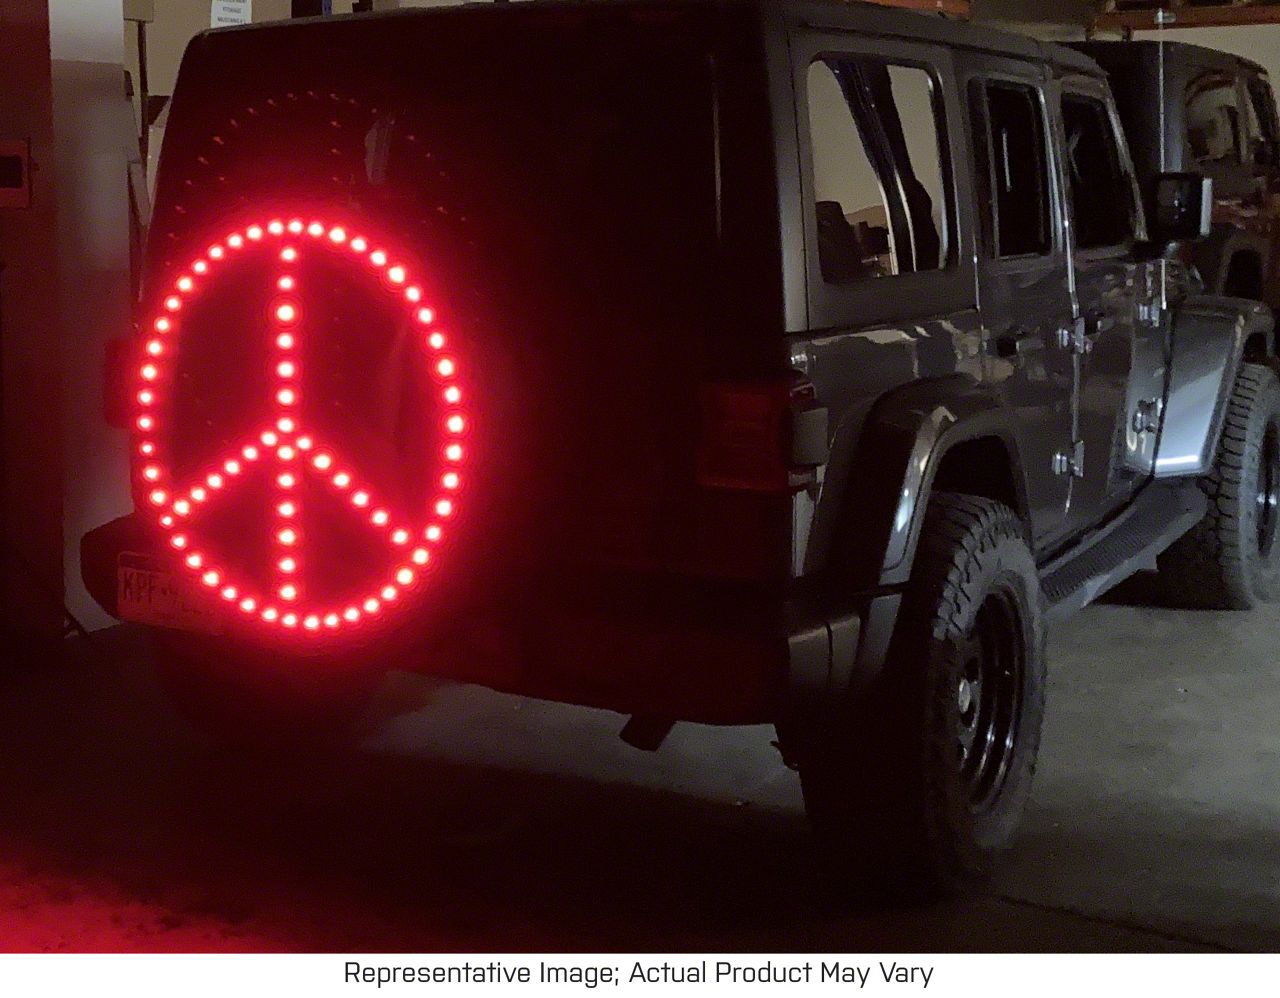 Jeep Wrangler Peace Sign LED Spare Tire Cover; Pink; 30 to 32-Inch Tire  Cover (66-18 Jeep CJ5, CJ7, Wrangler YJ, TJ  JK)